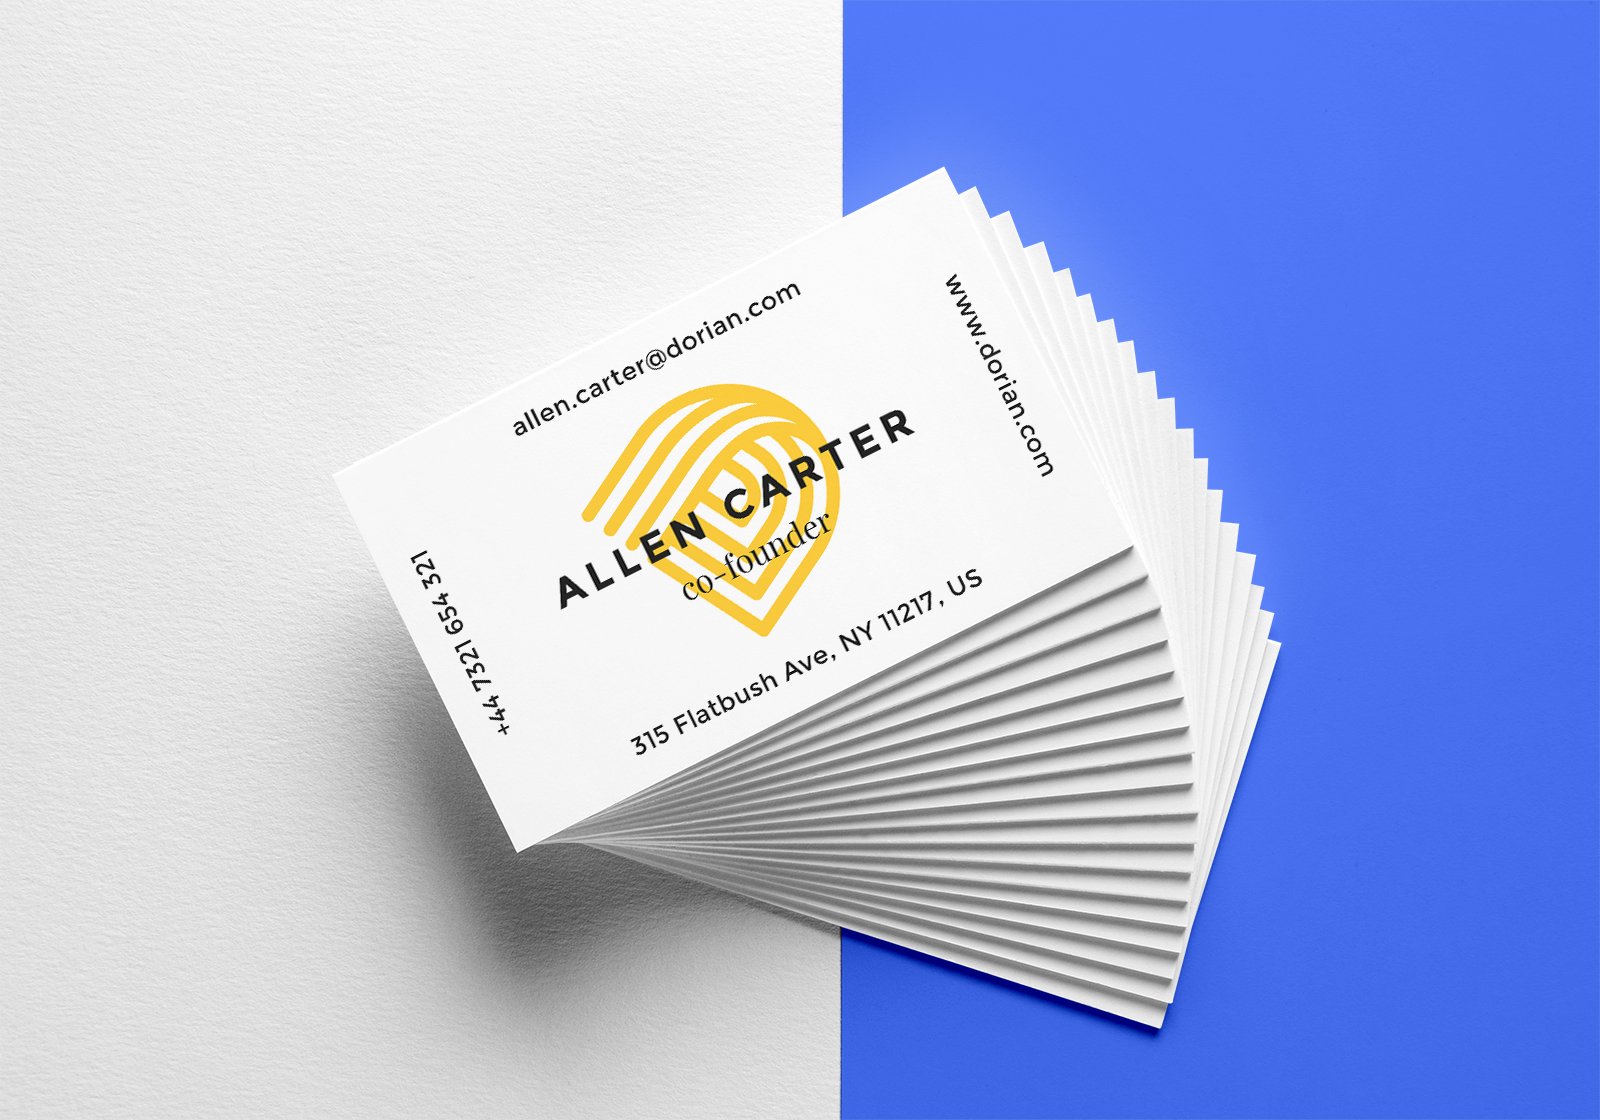 Realistic Business Cards Mockup #6